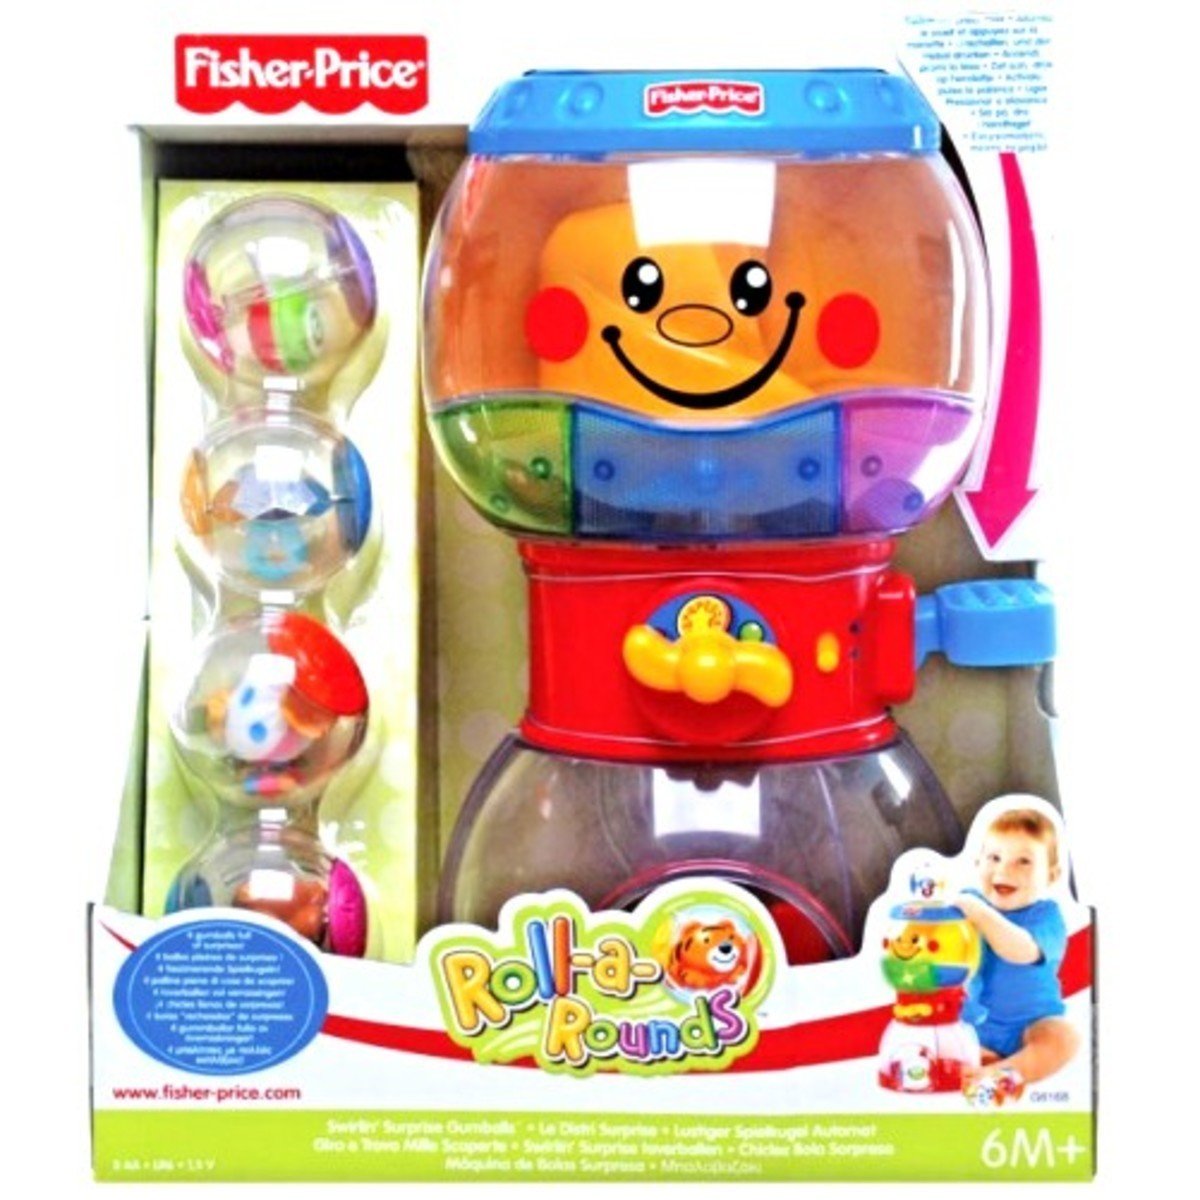 Fisher Price Roll-a-Rounds Swirlin Surprise Gumballs